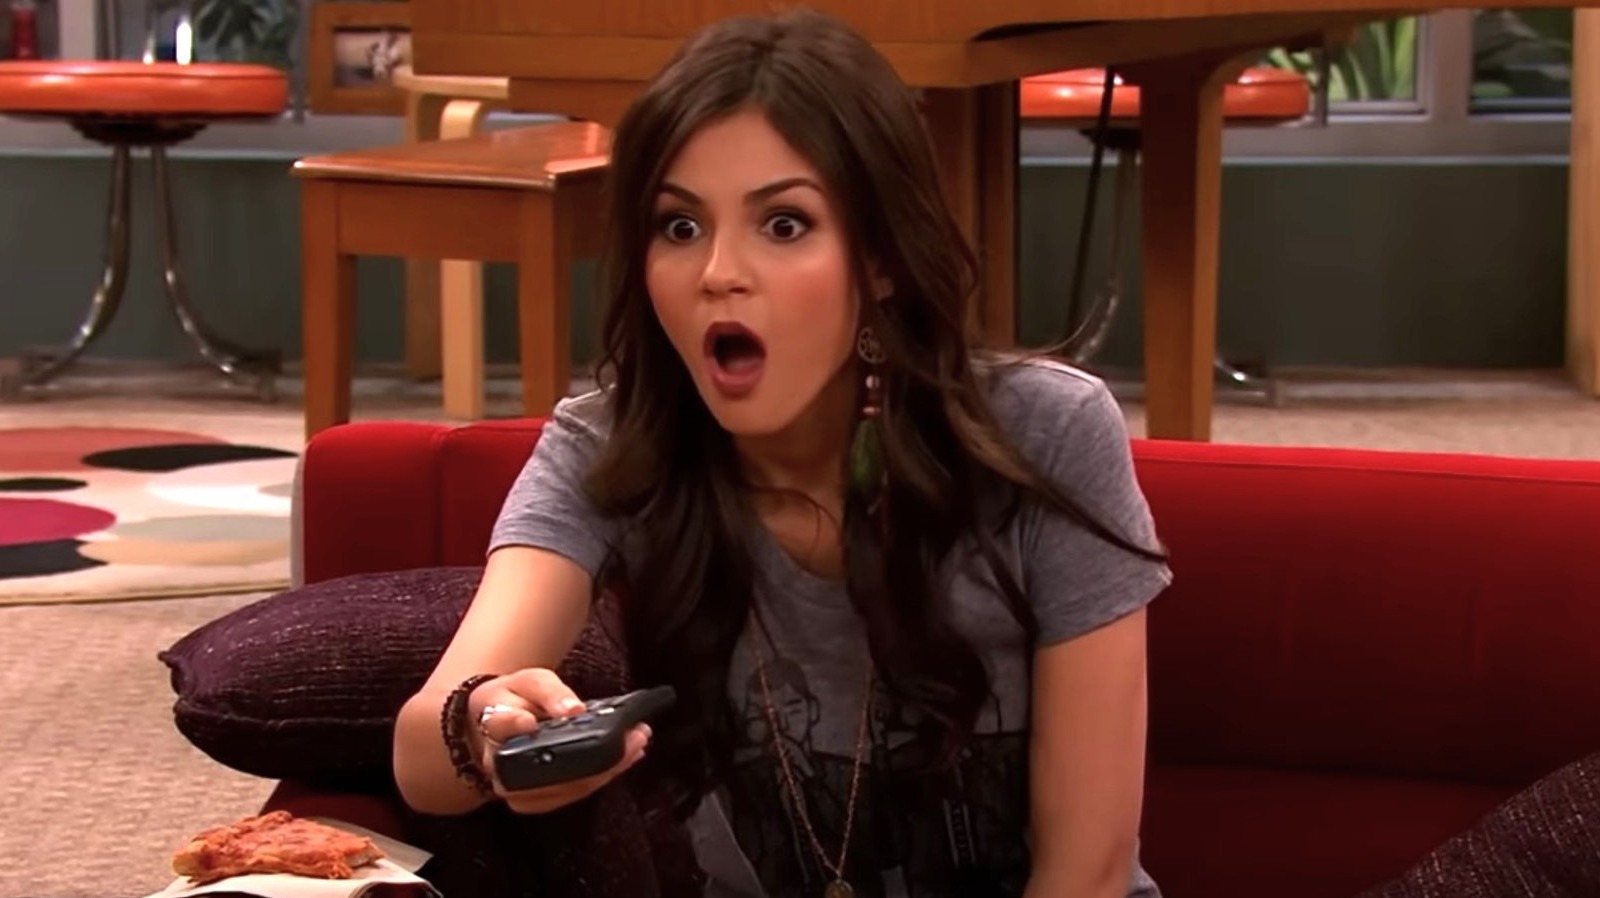 Victoria Justice's Was Shocked To Hear About Victorious' Cancelation